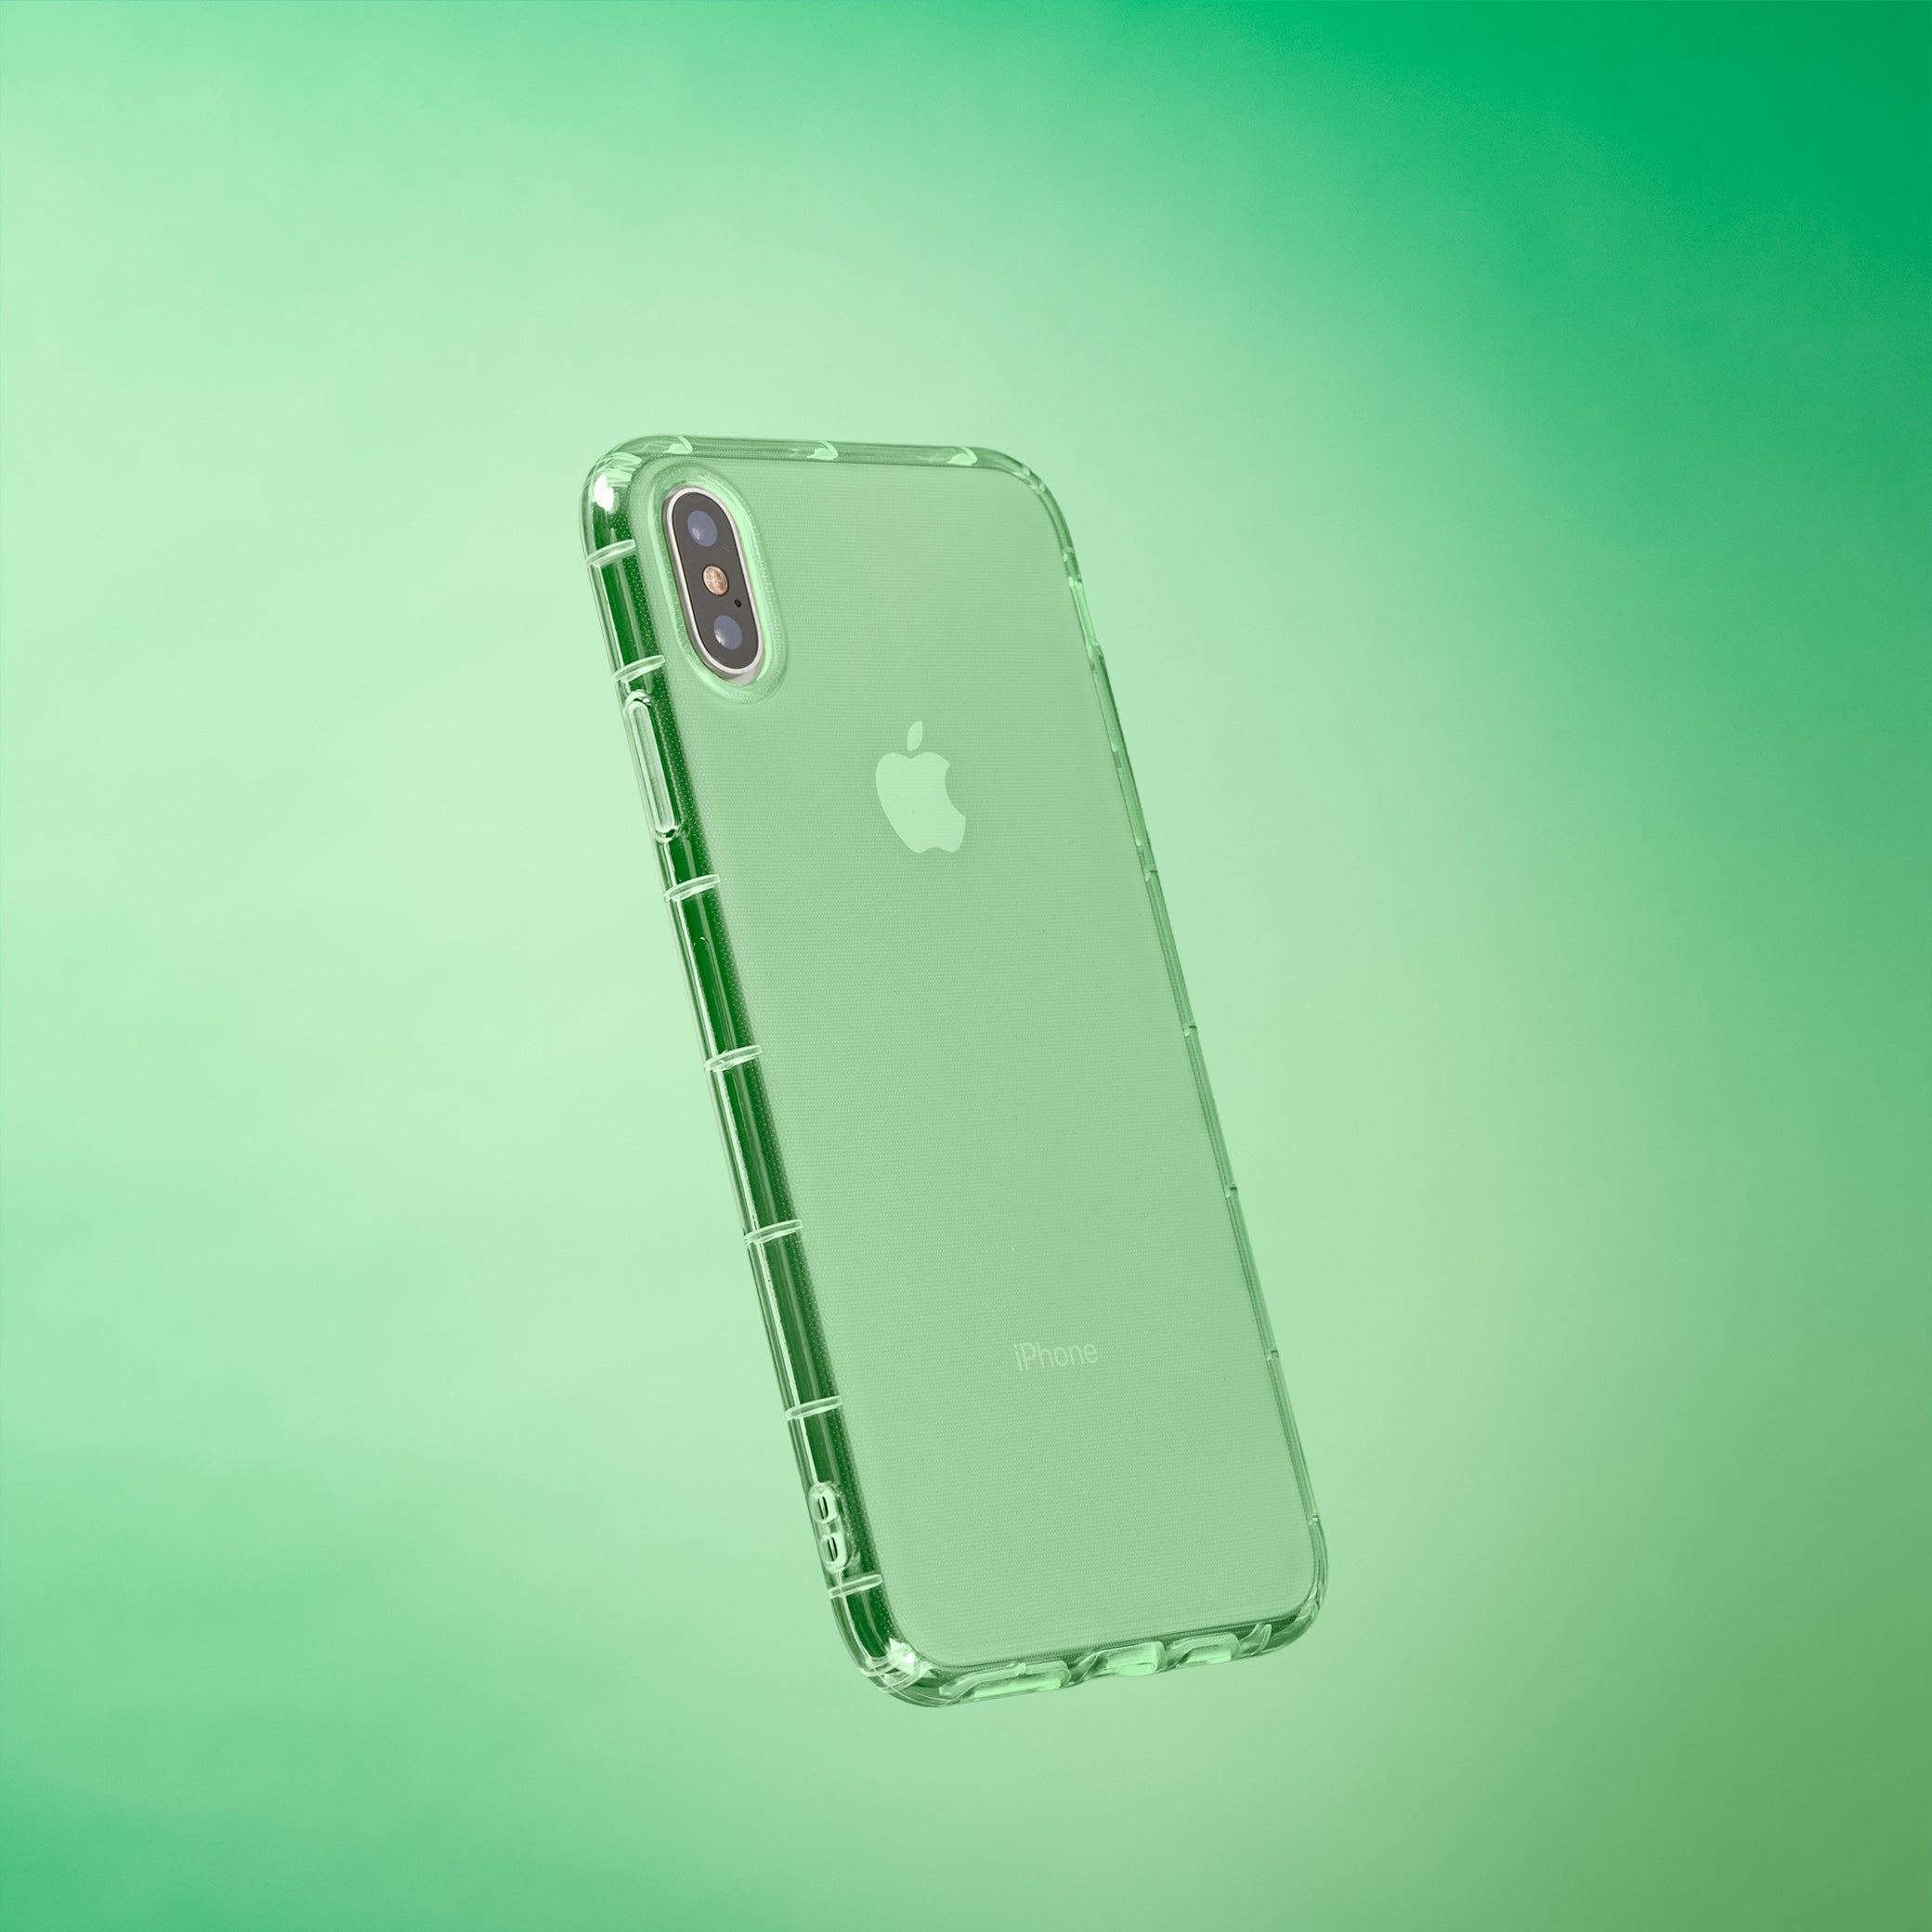 Highlighter Case for iPhone Xs Max - Precious Emerald Green